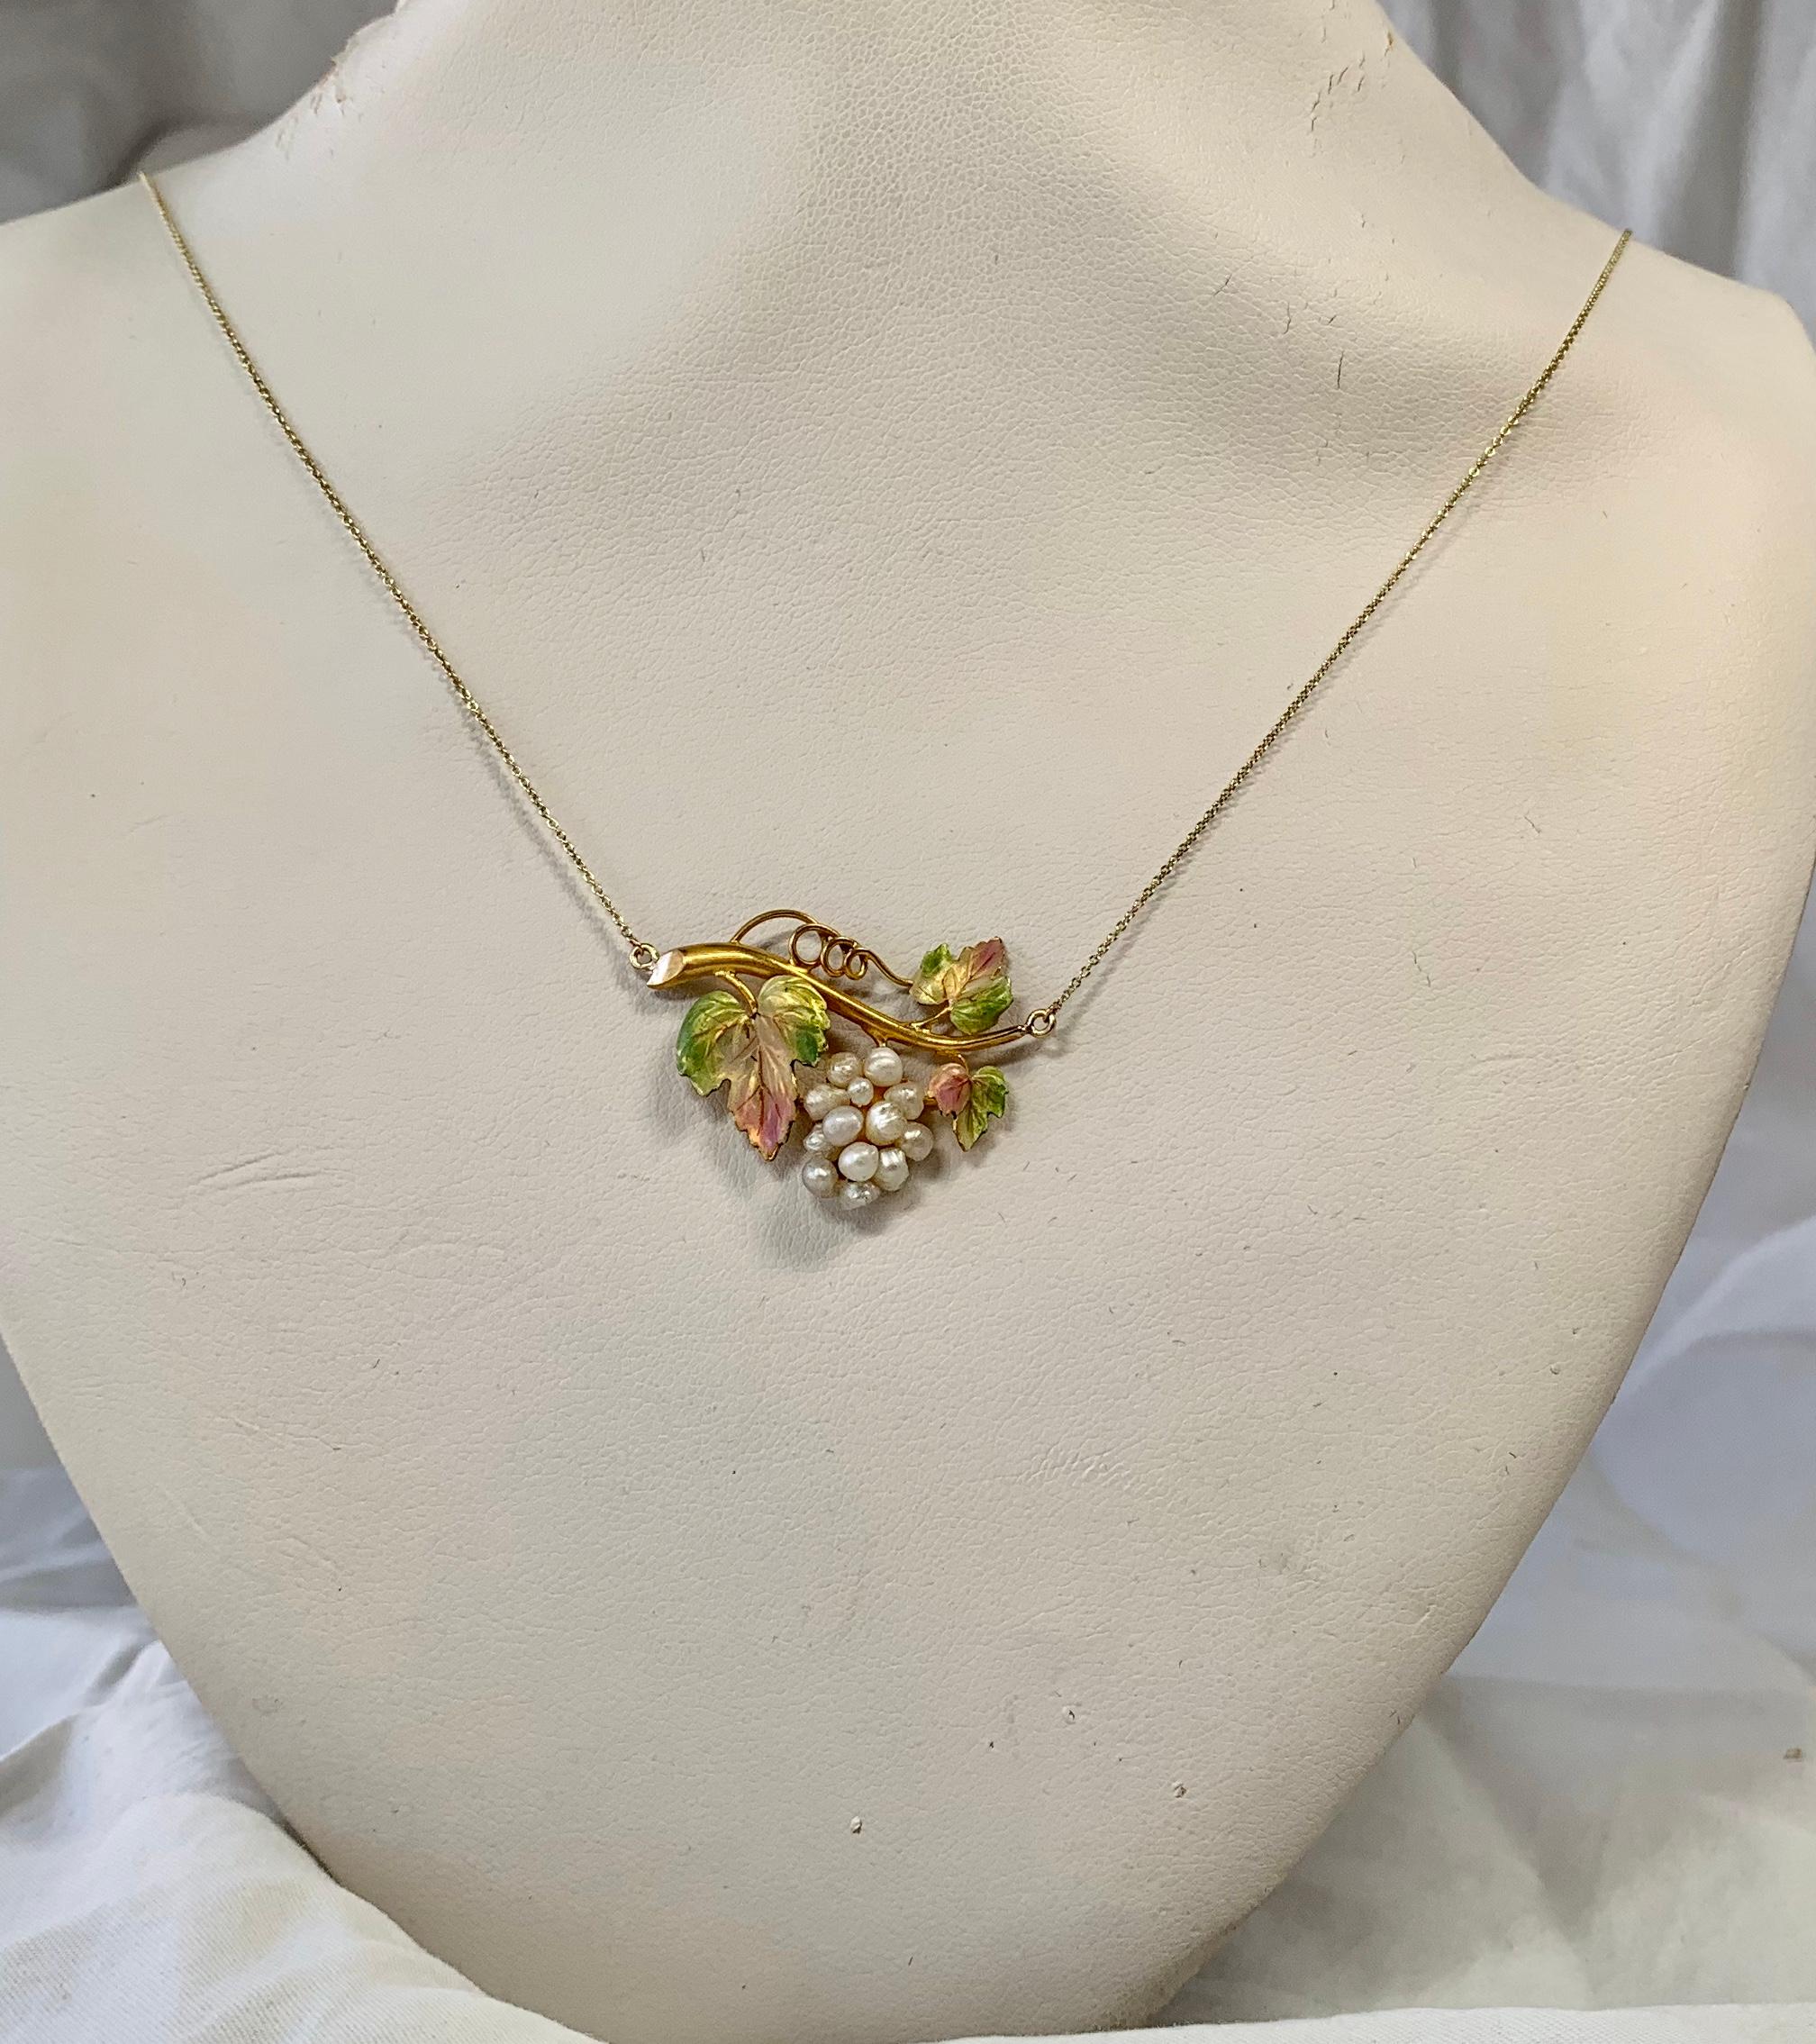 THIS IS ONE OF THE MOST BEAUTIFUL ANTIQUE ENAMEL JEWELS WE HAVE SEEN.  THE VICTORIAN - ART NOUVEAU PENDANT NECKLACE IS IN THE FORM OF A CLUSTER OF GRAPES HANGING FROM THE VINE.  THE GRAPES ARE A CLUSTER OF WHITE PEARLS.  THE GRAPE LEAVES ARE ADORNED